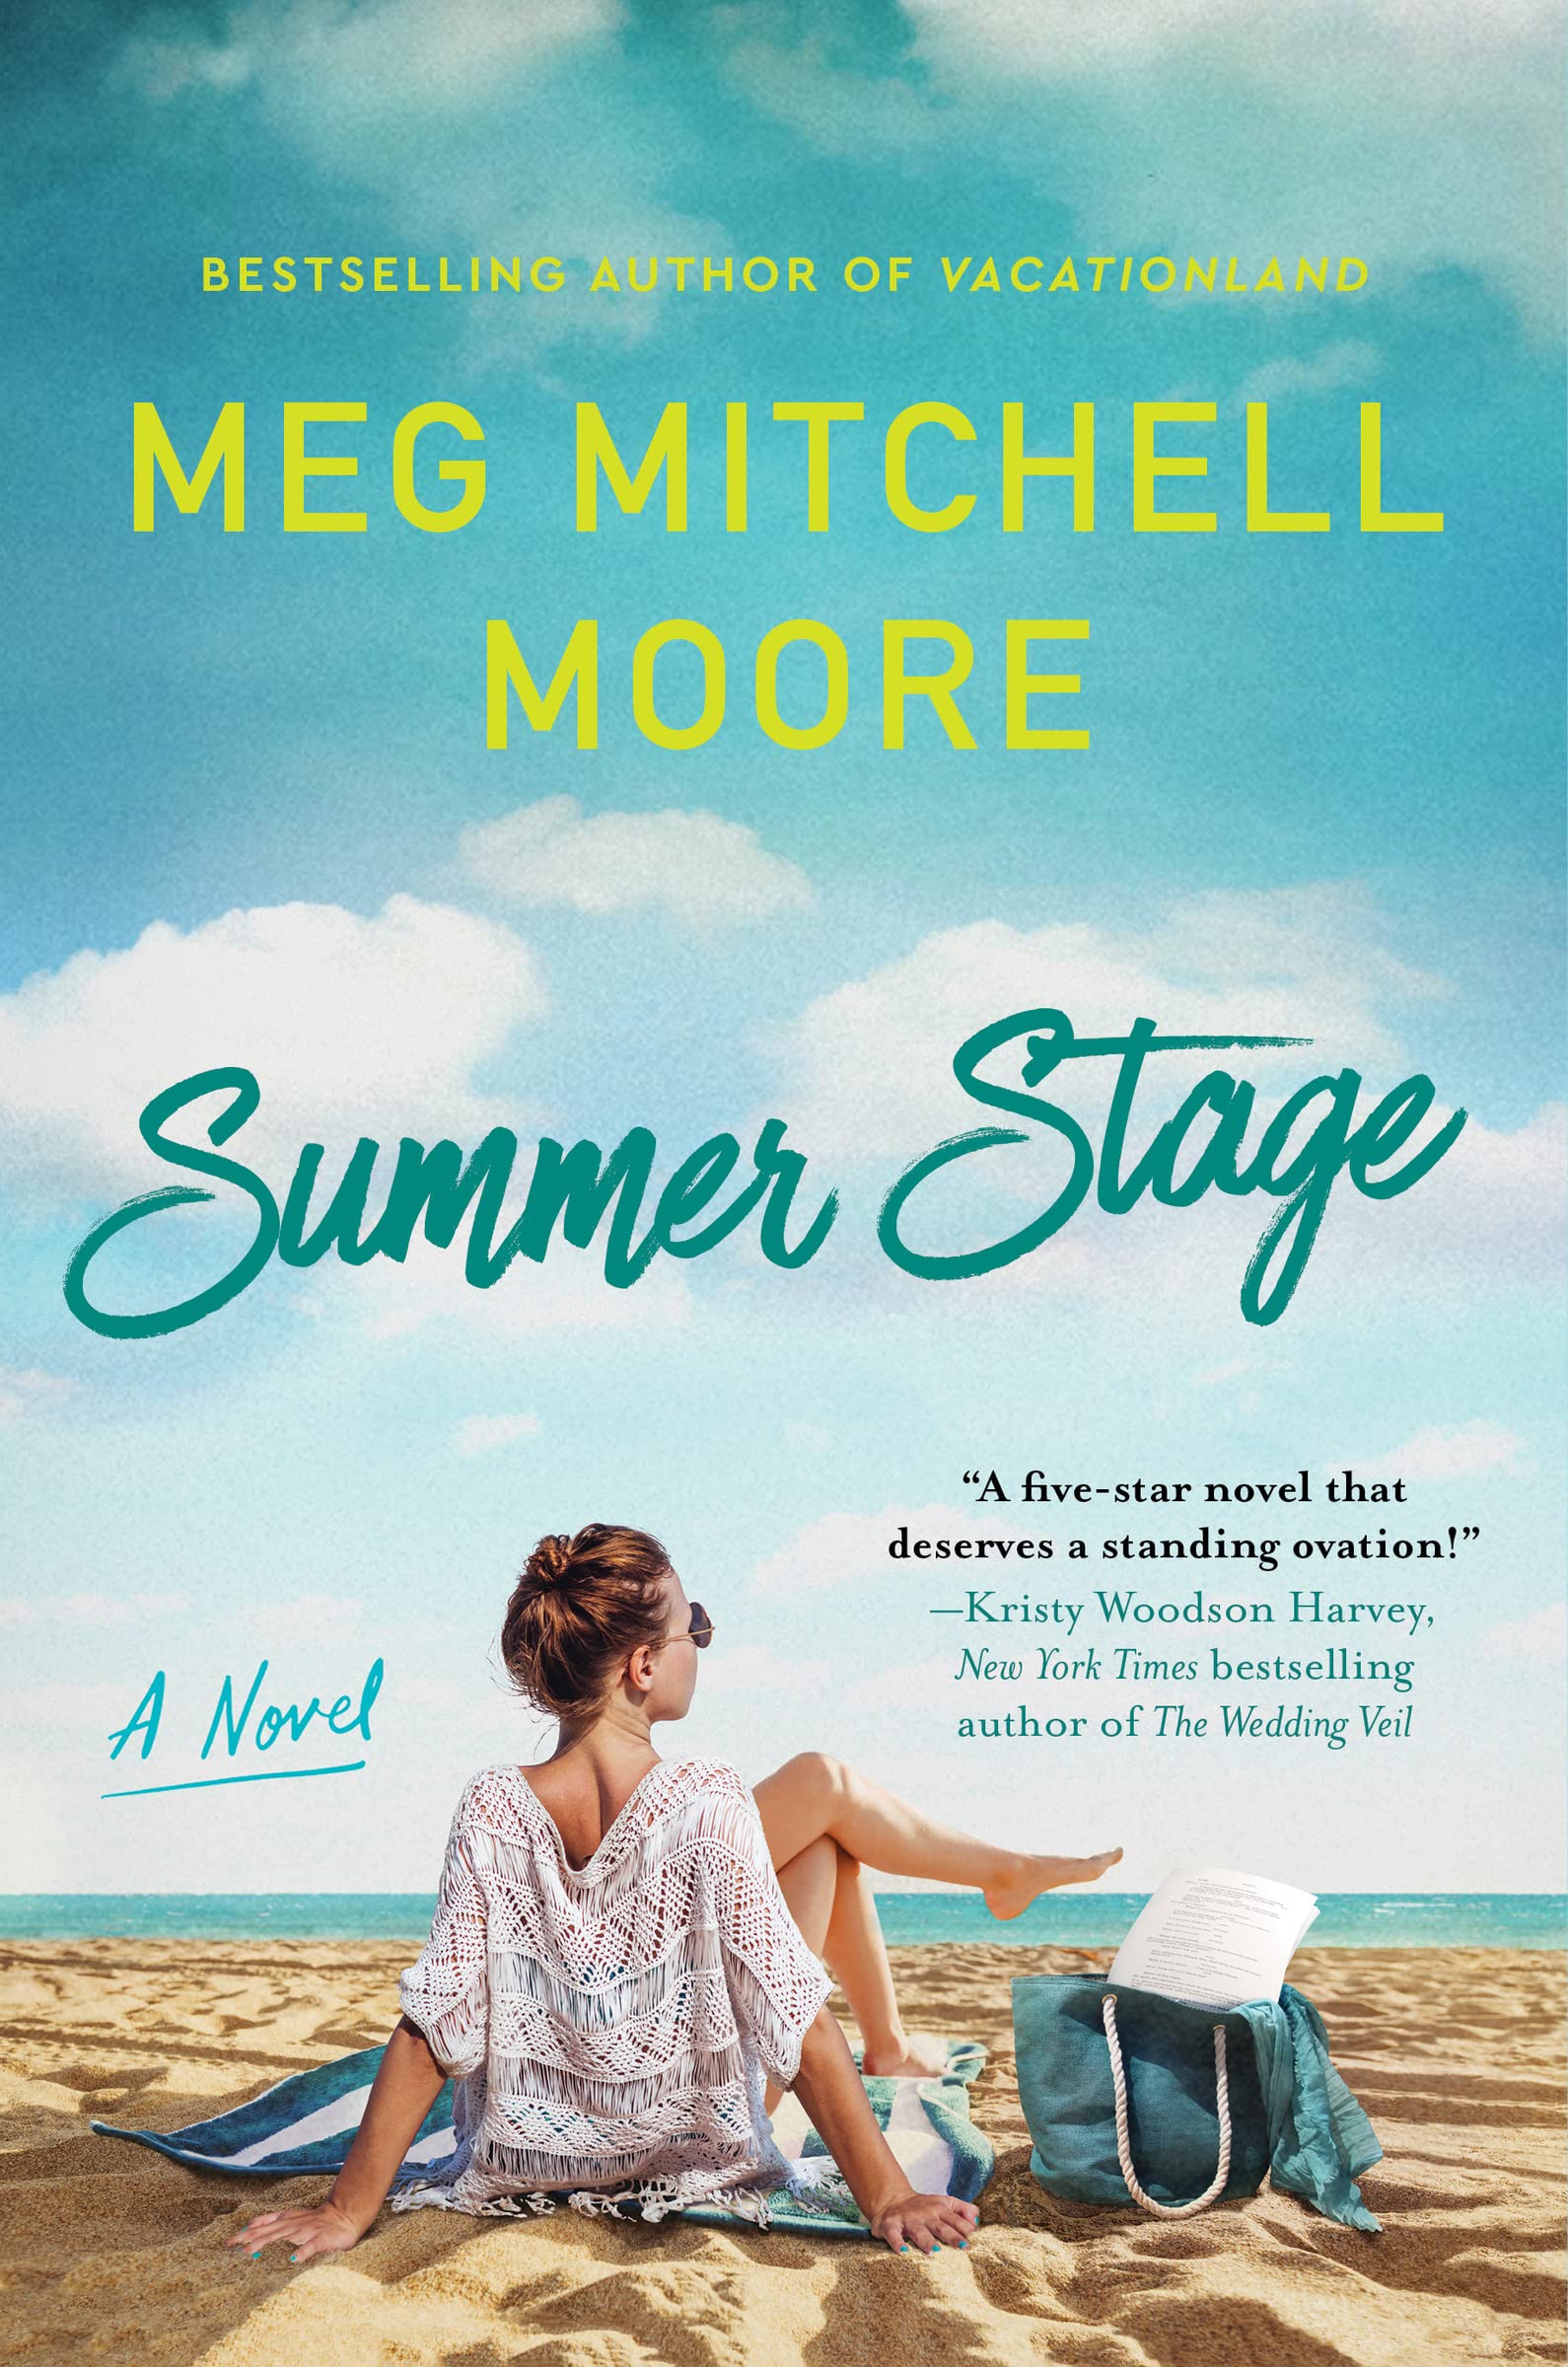 Image for "Summer Stage"